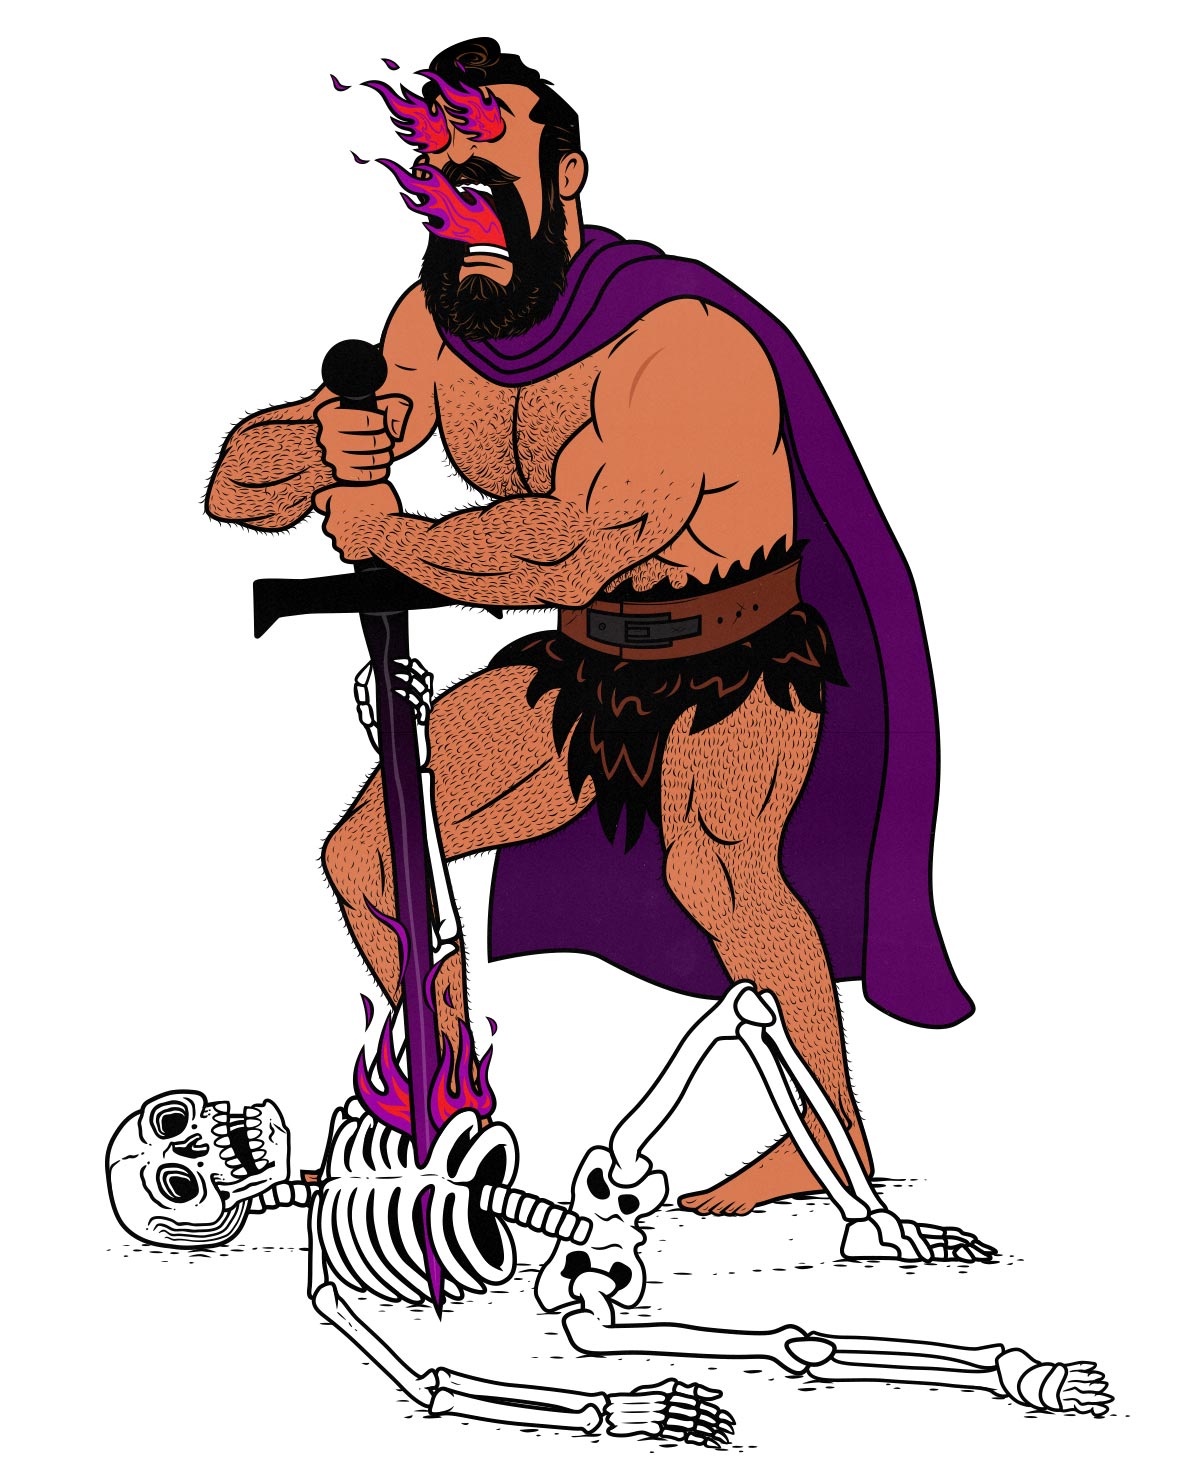 Illustration of a barbarian weight lifter pumped up on energy drinks and pre-workout supplements.